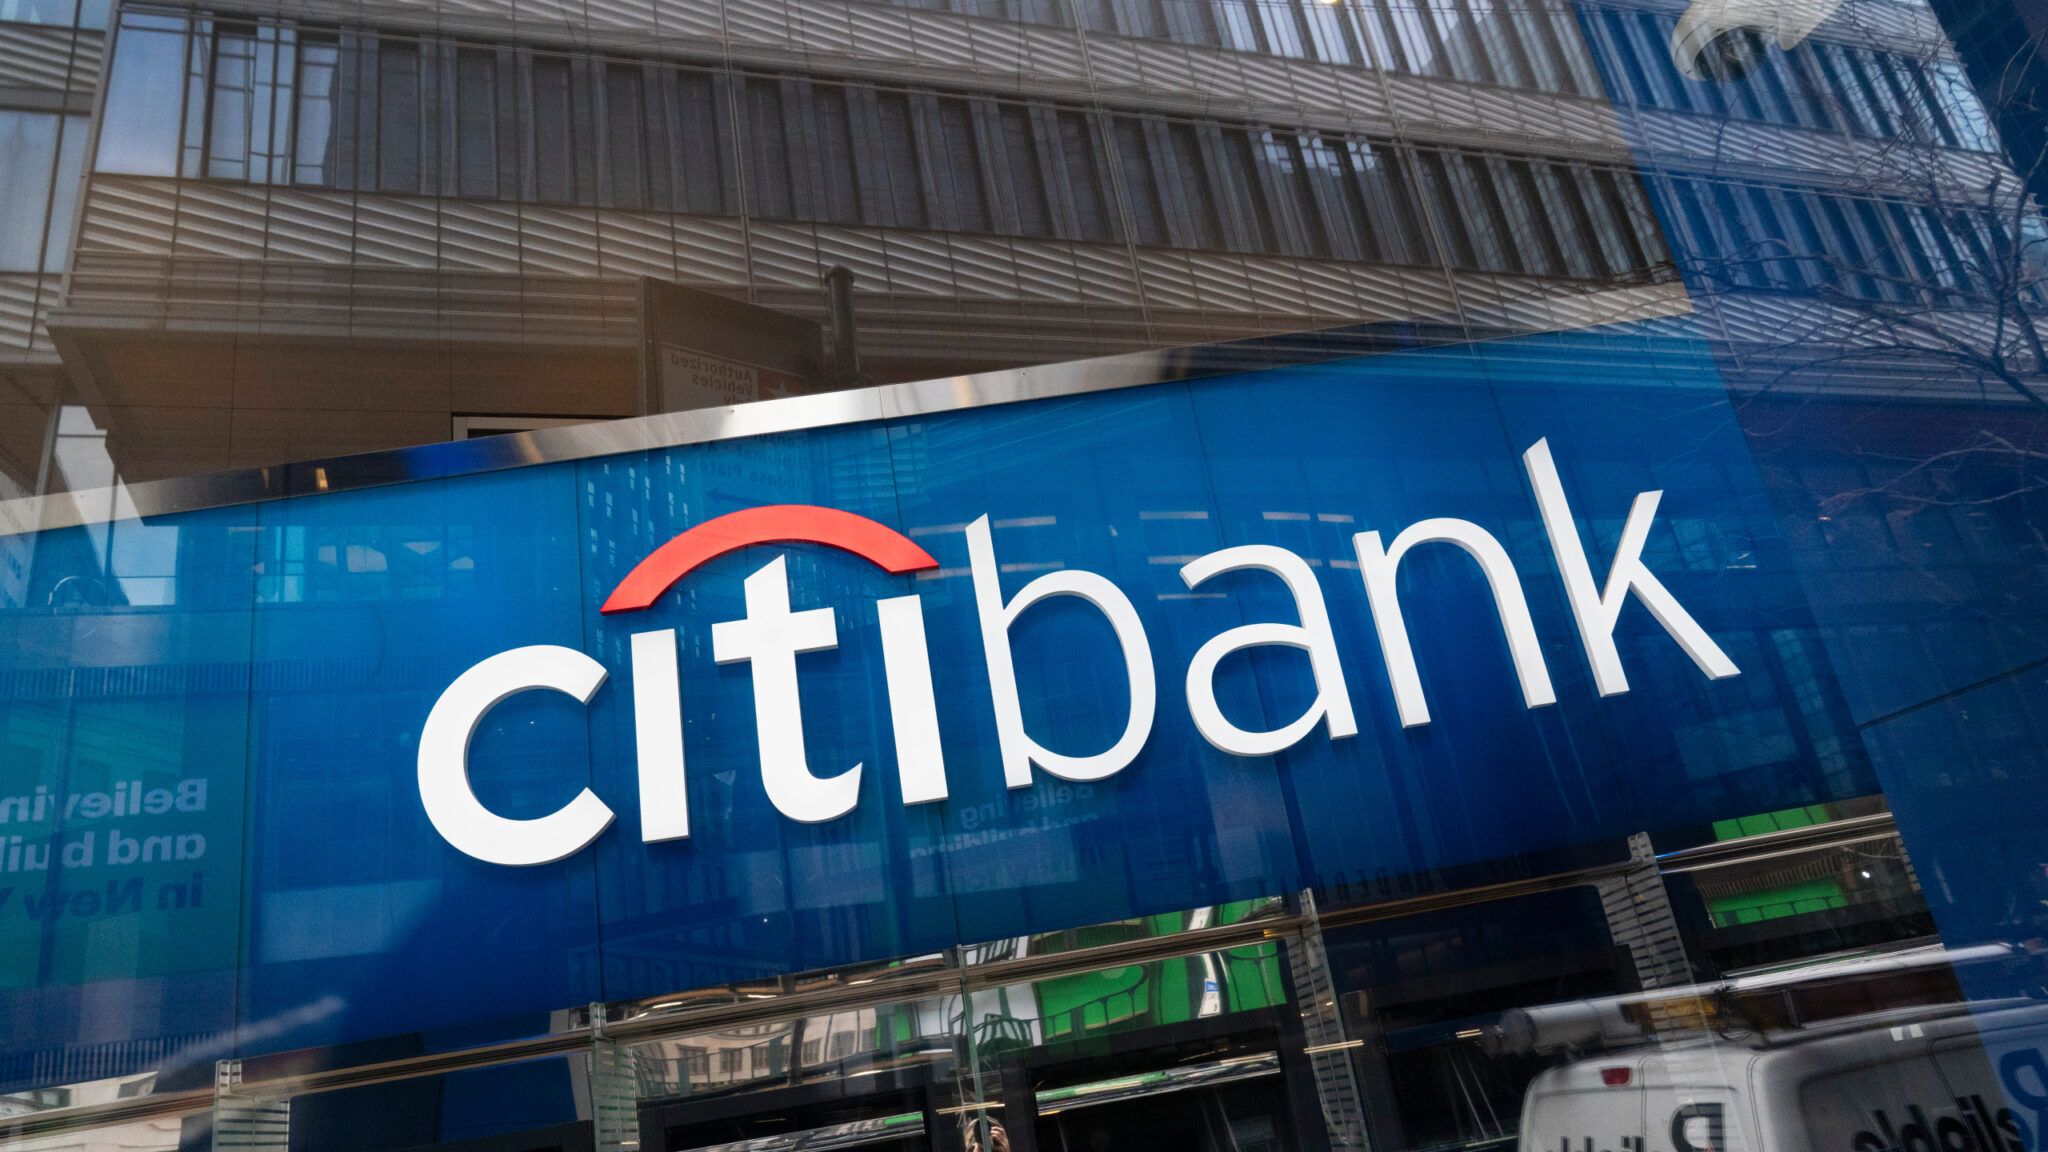 Judge Rules Recipients Keep $500M Citigroup Transfered in Error